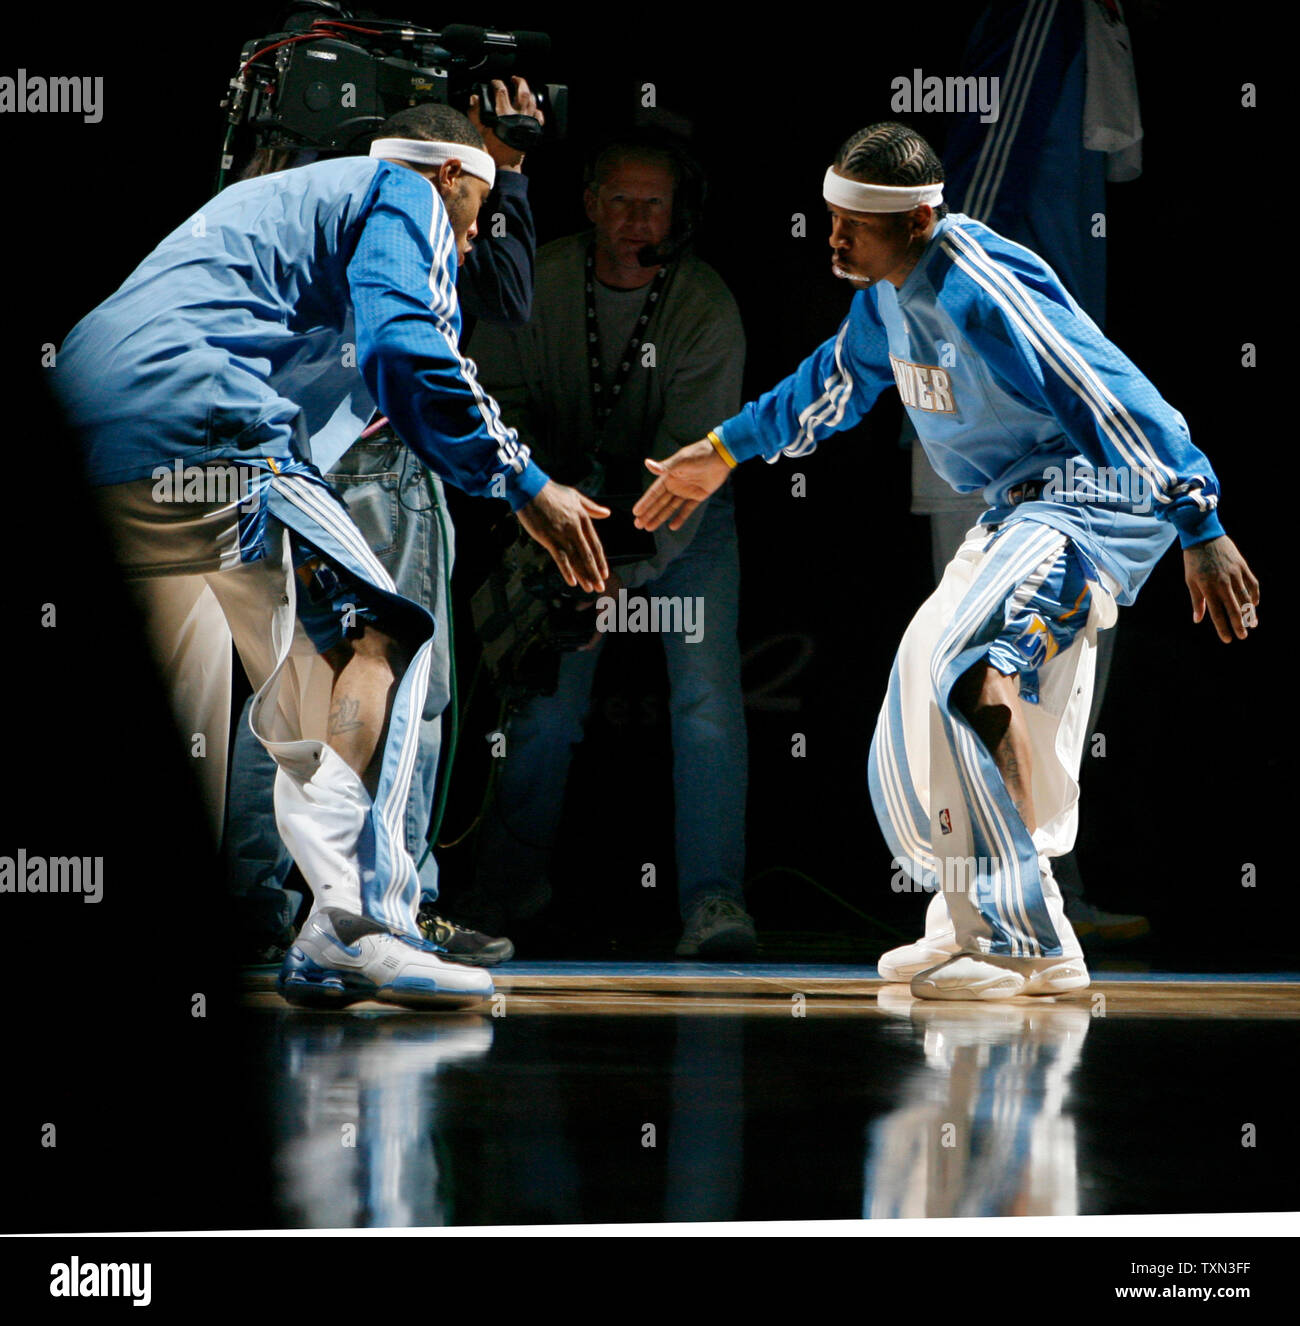 Denver Nuggets guard Allen Iverson (R) low-fives teammate Kenyon Martin during team introduction before playing the Chicago Bulls at the Pepsi Center in Denver on November 20, 2007.  Denver beat Chicago 112-91.   (UPI Photo/Gary C. Caskey) Stock Photo